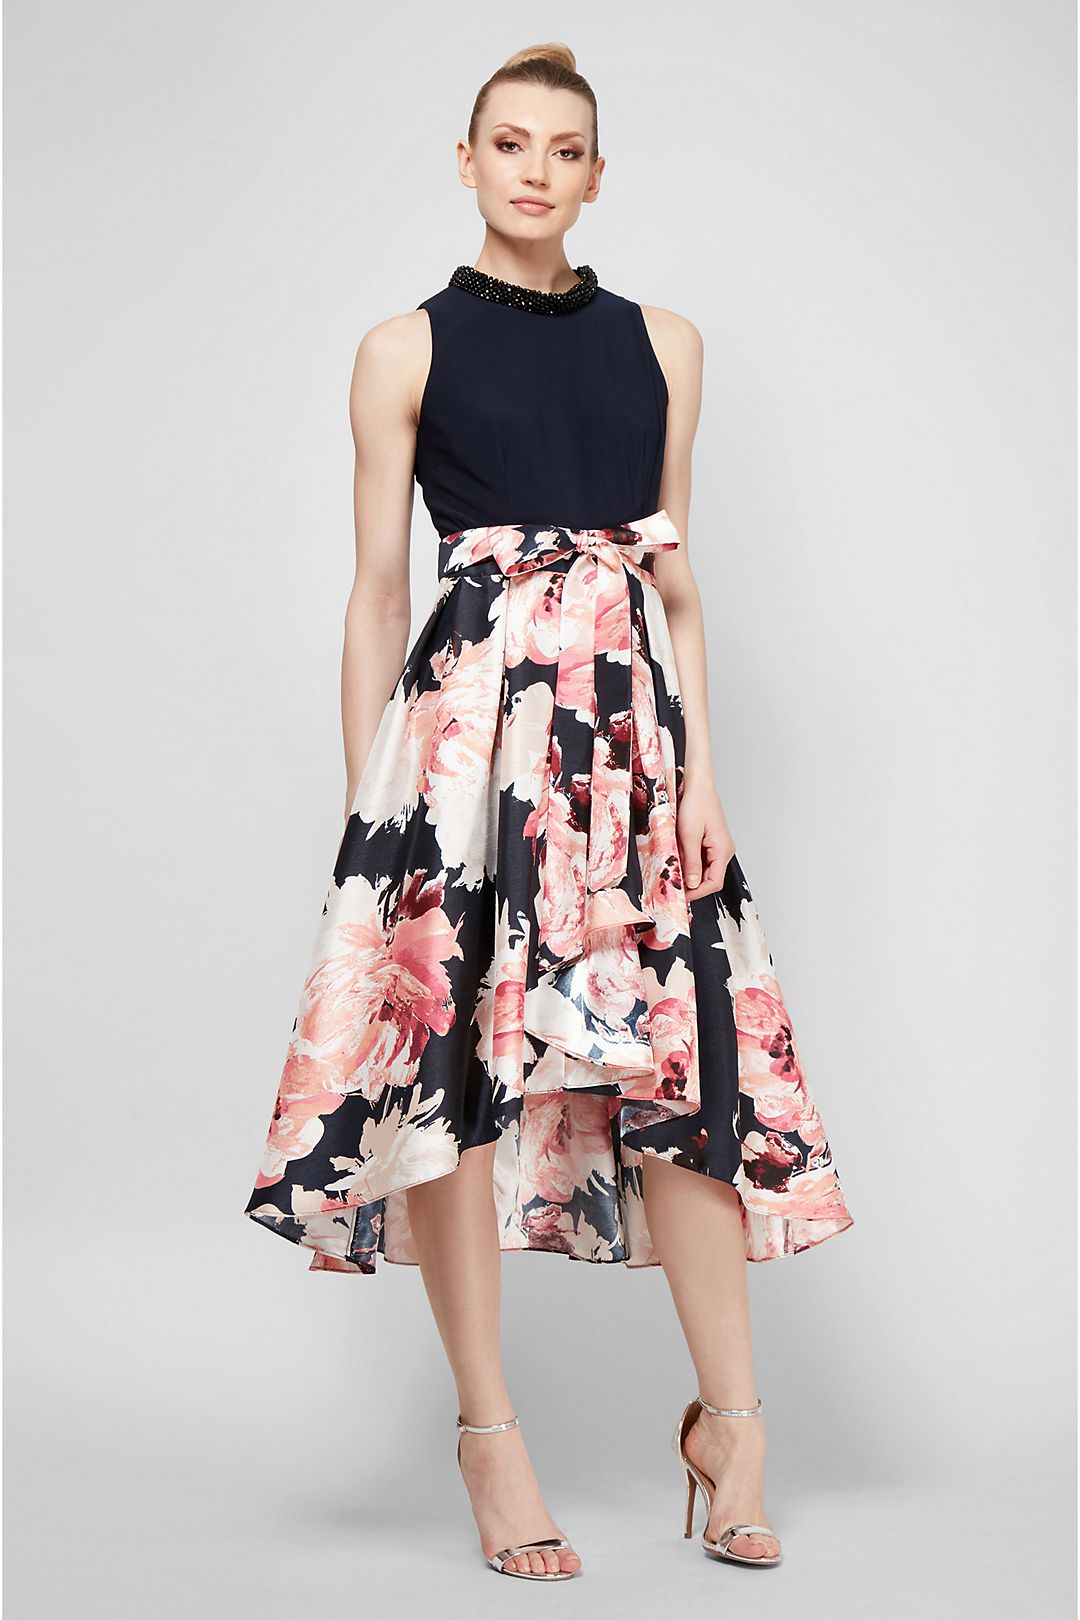 Beaded High Neck Floral Printed Dress with Keyhole Image 1